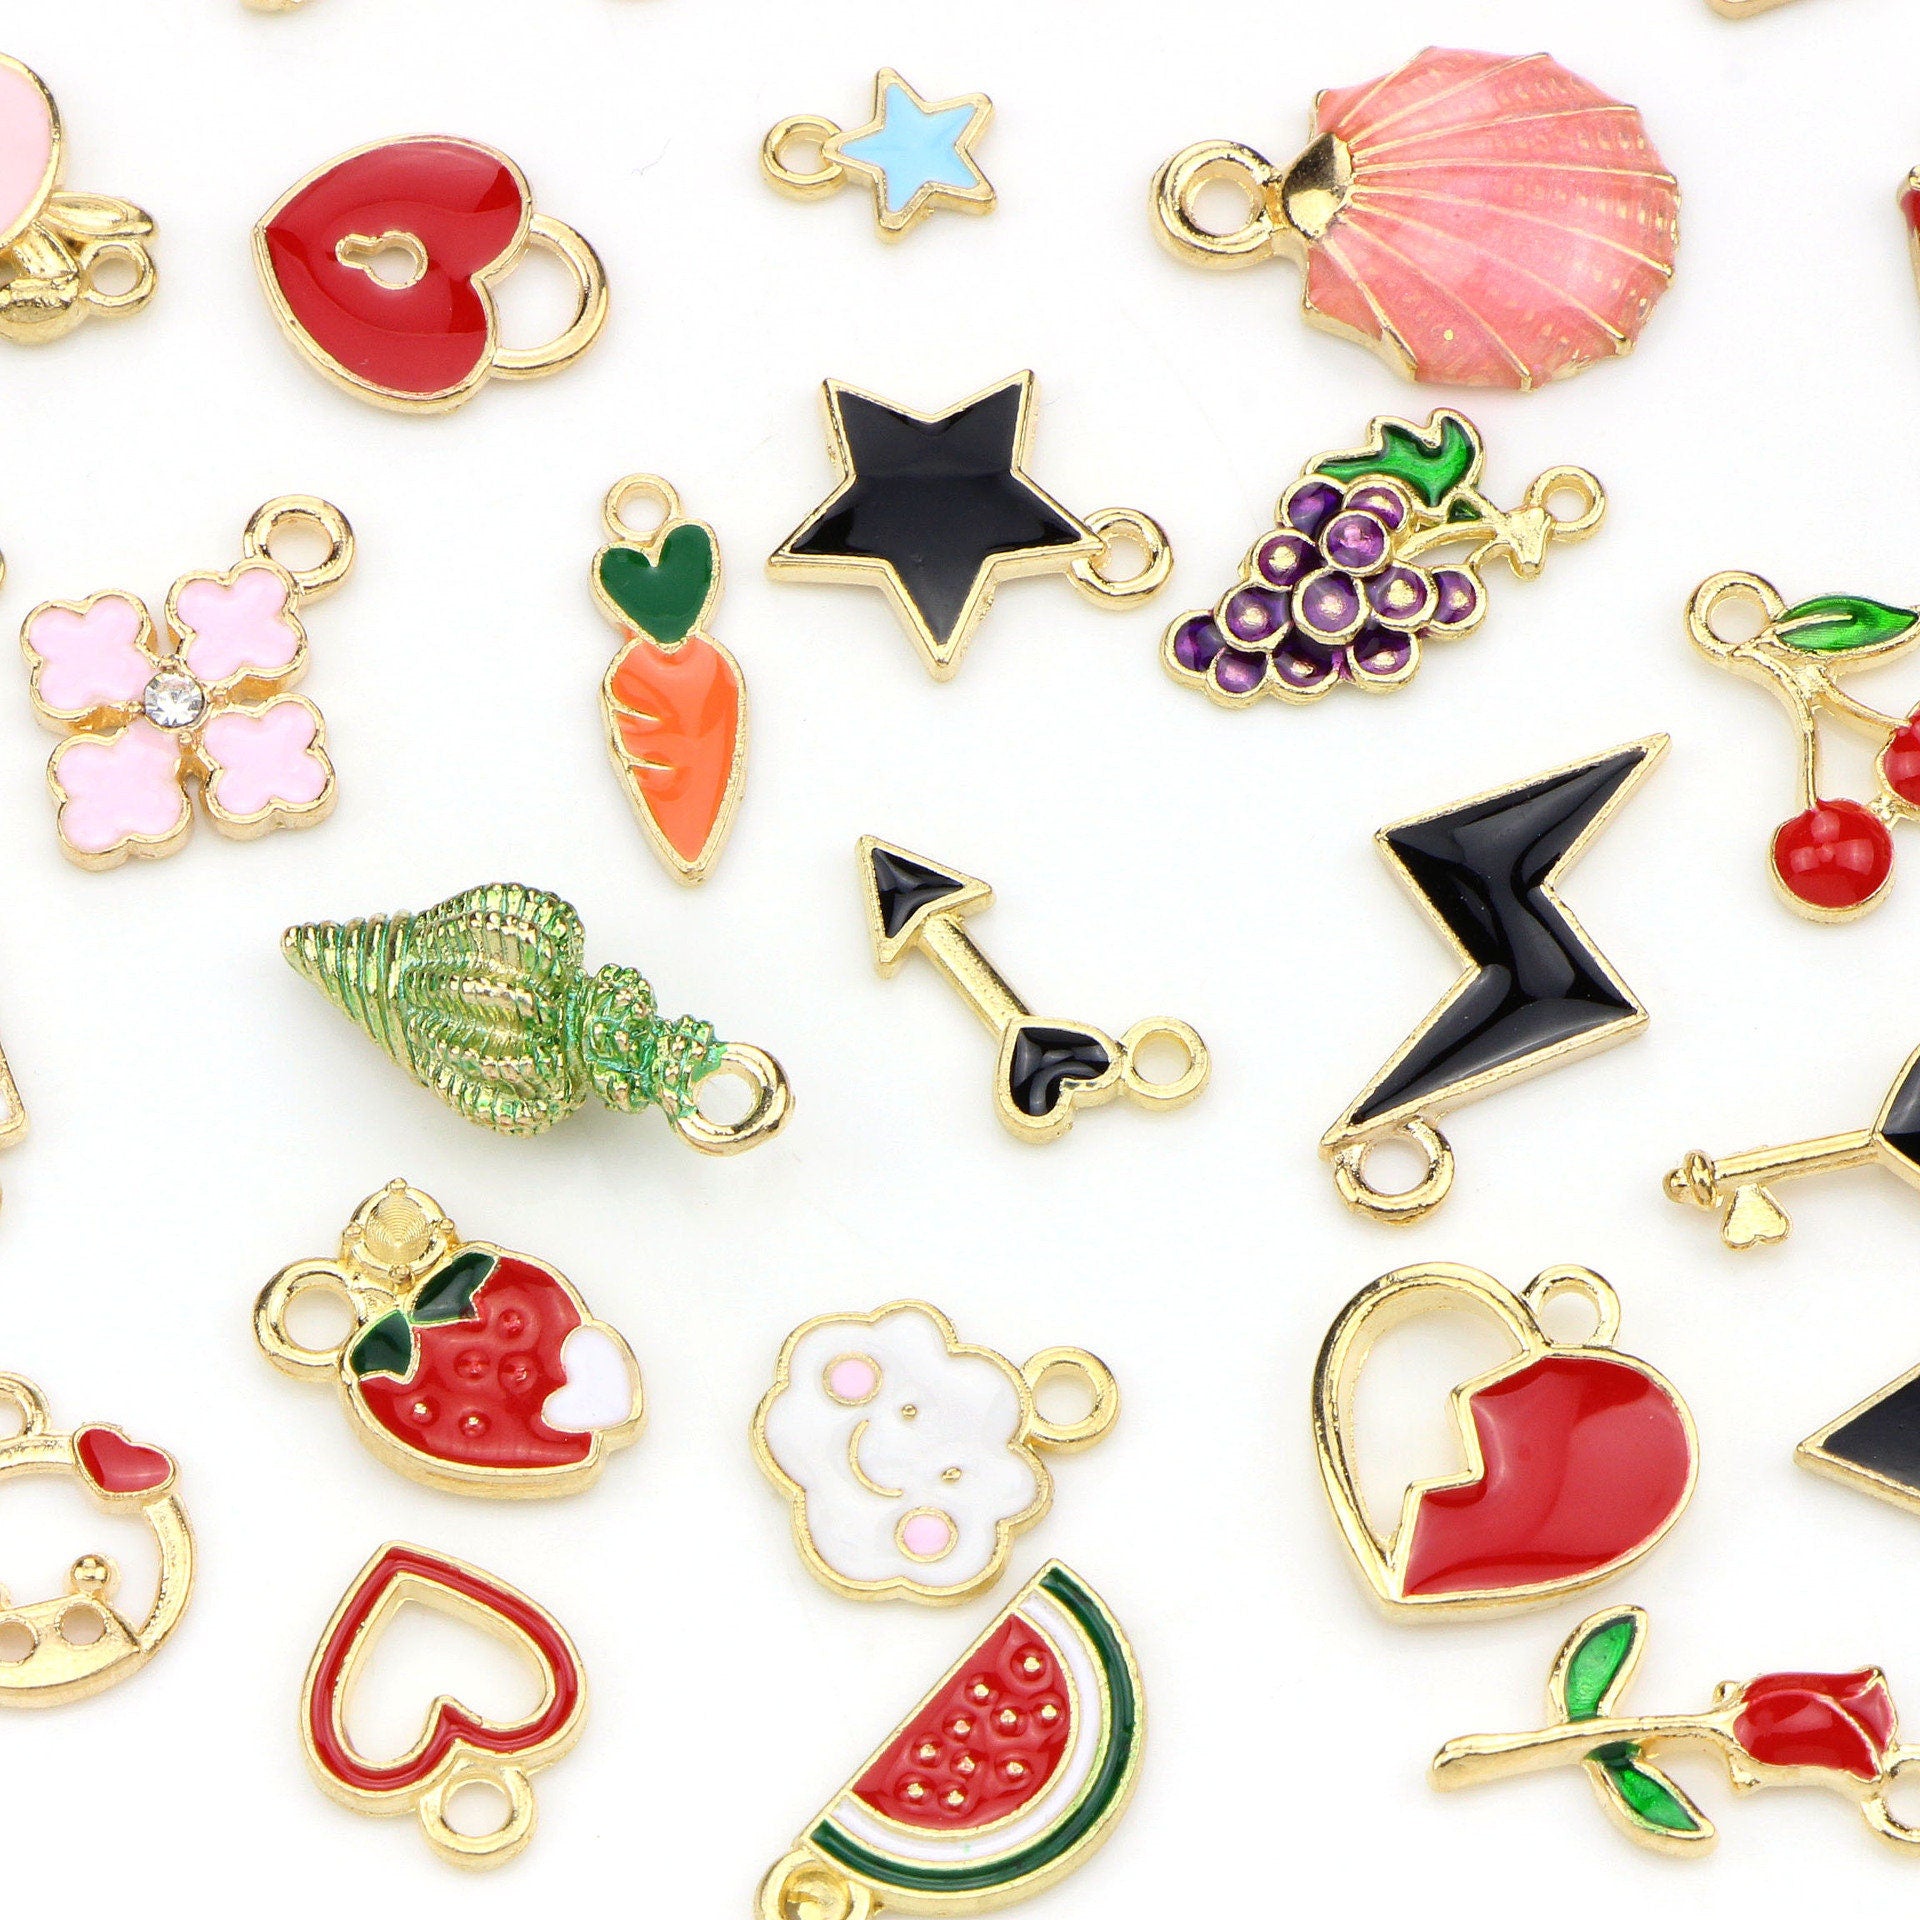 30 fun assorted enamel charms, Nickel free metal pendants, Cute mixed shapes for jewelry making